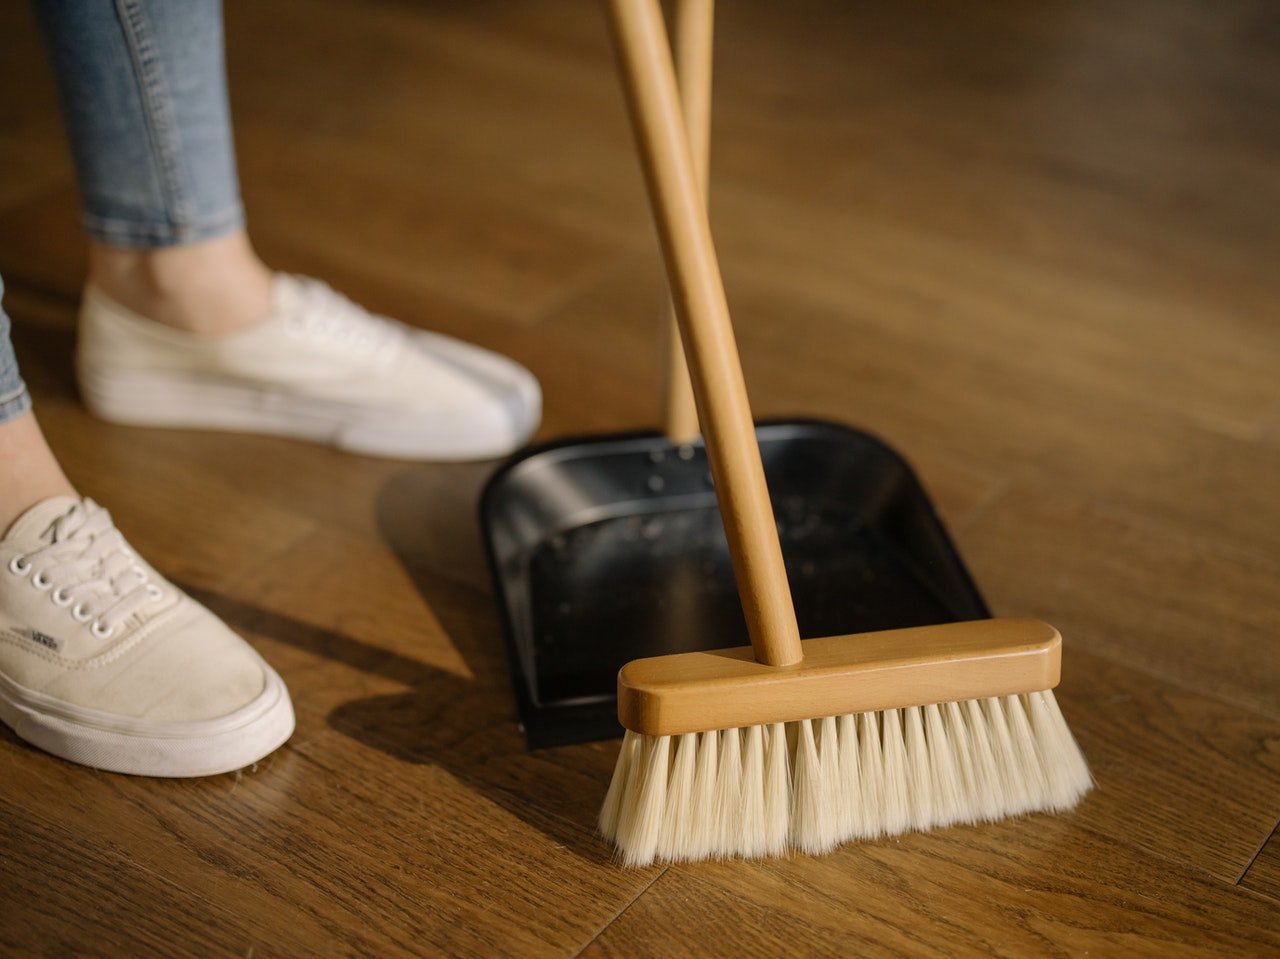 She deep cleaned the house to divert her attention | Source: Pexels